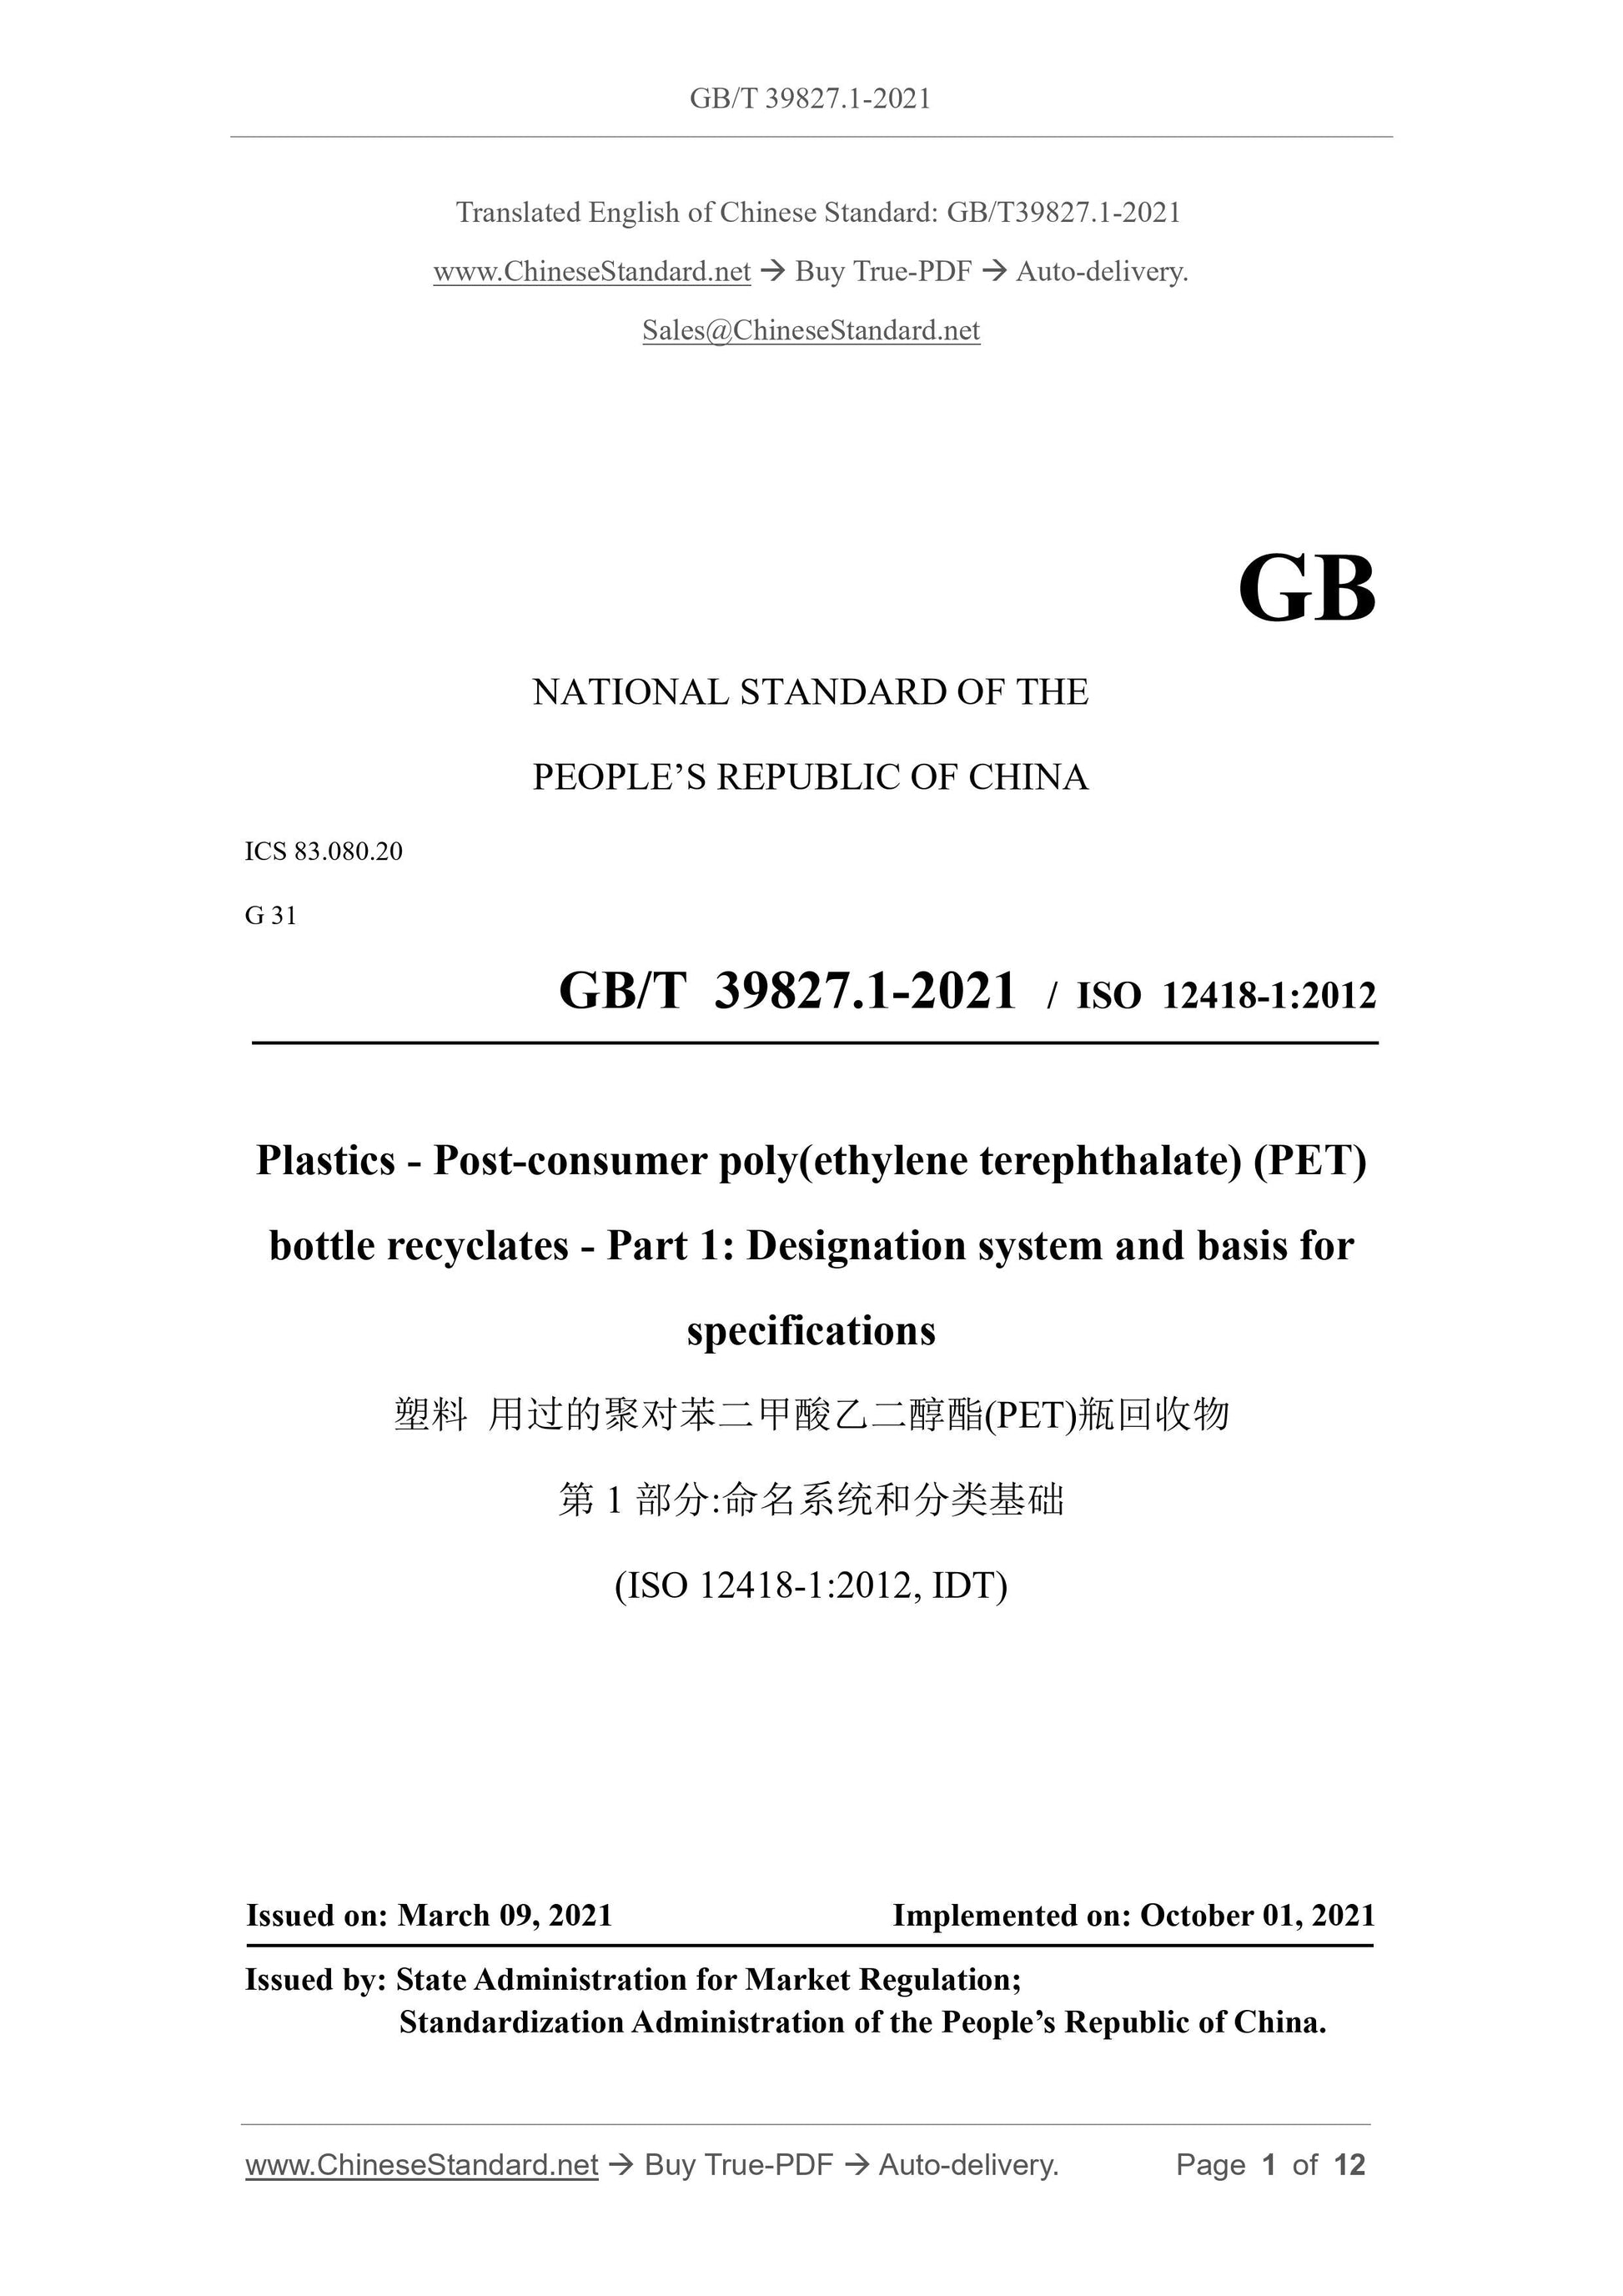 GB/T 39827.1-2021 Page 1